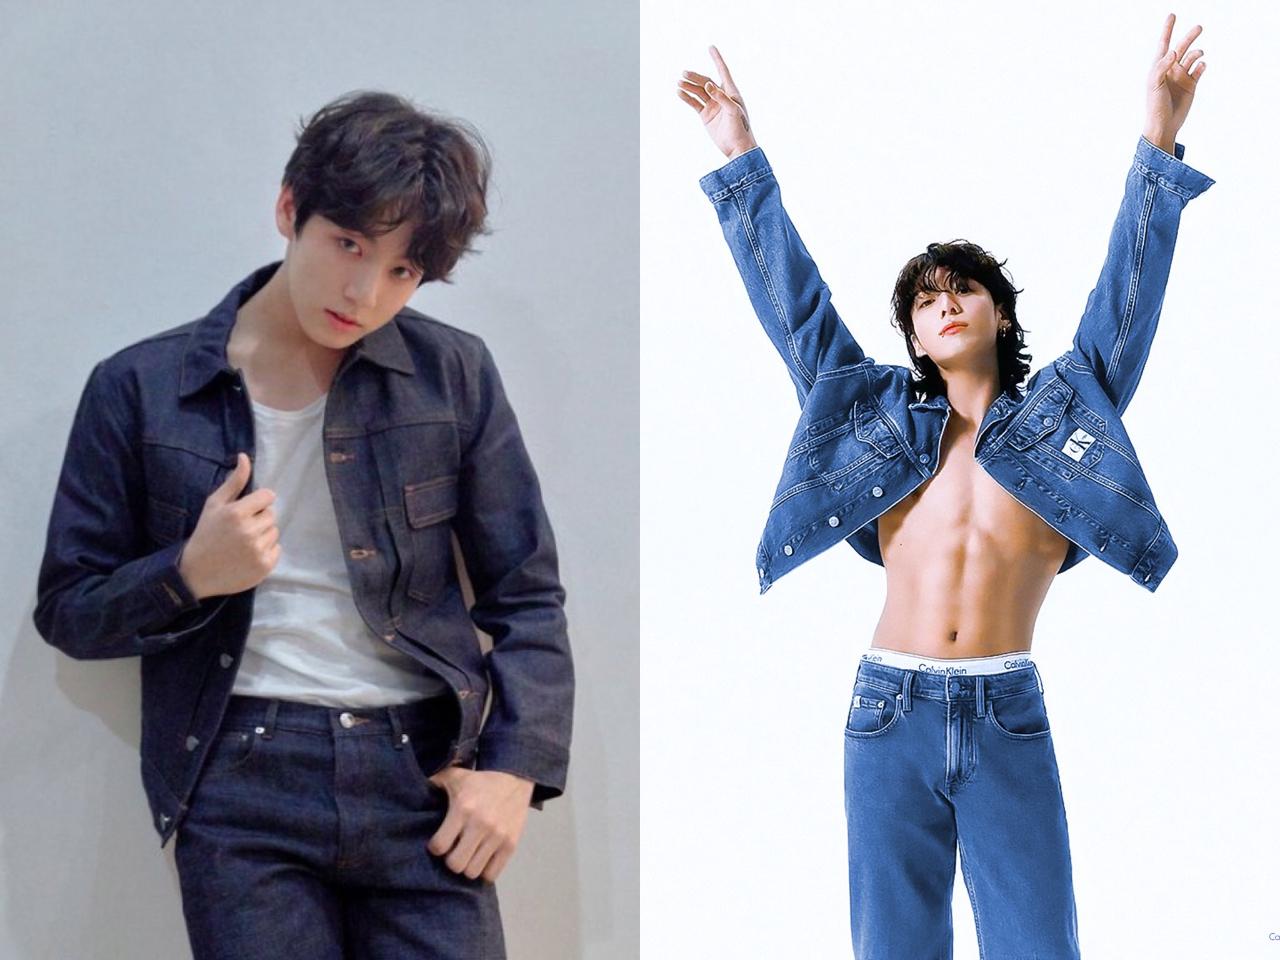 Denim is another staple in Jungkook's wardrobe. In 2018, BTS did an all denim, all-black hair concept photoshoot for their Love Yourself: Tear album and fans wanted to see (a lot) more